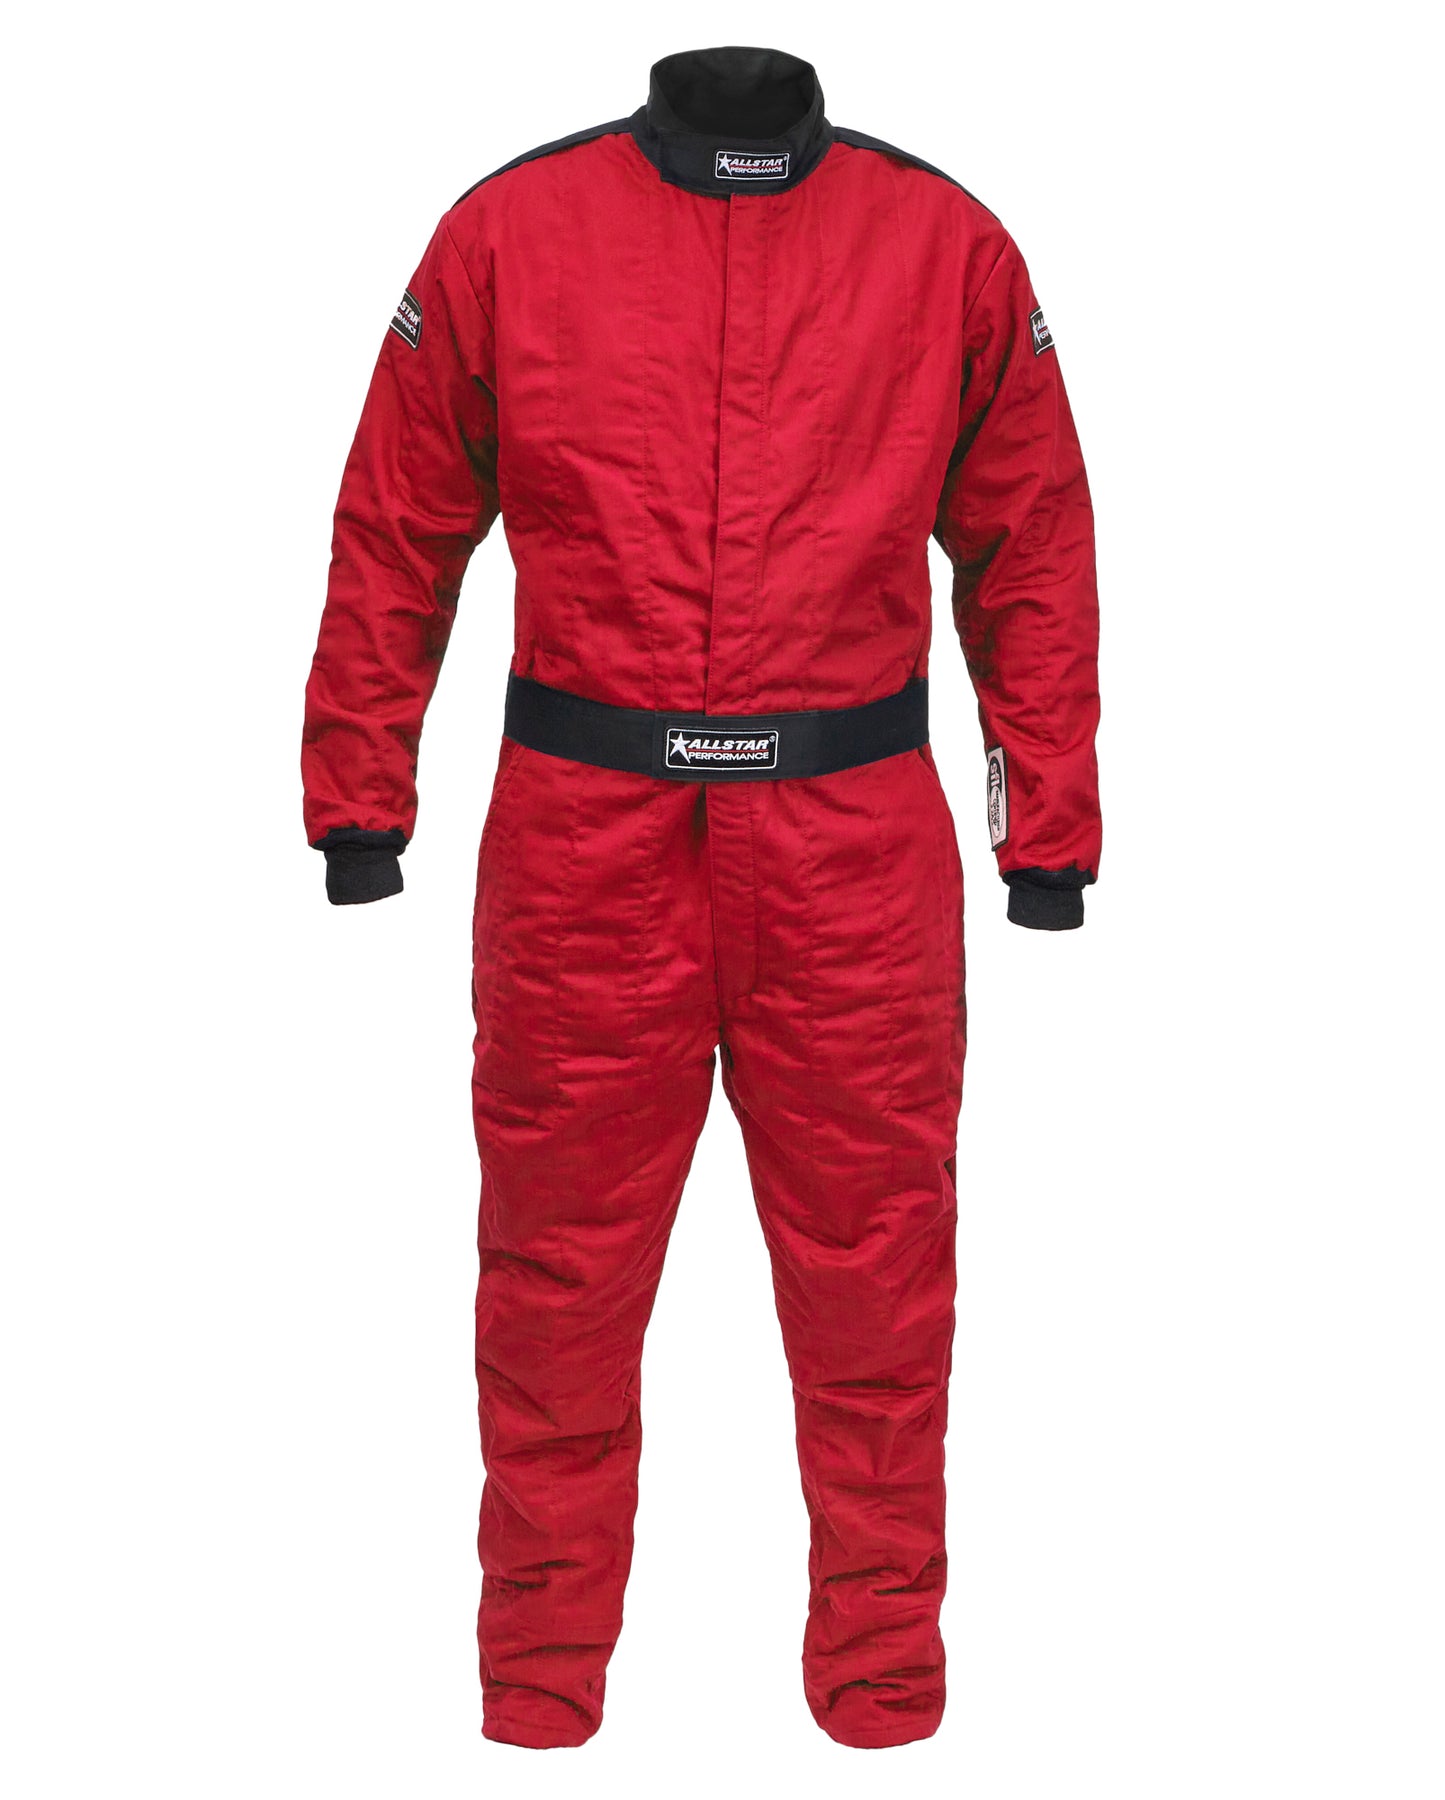 Racing Suit SFI 3.2A/5 M/L Red X-Large